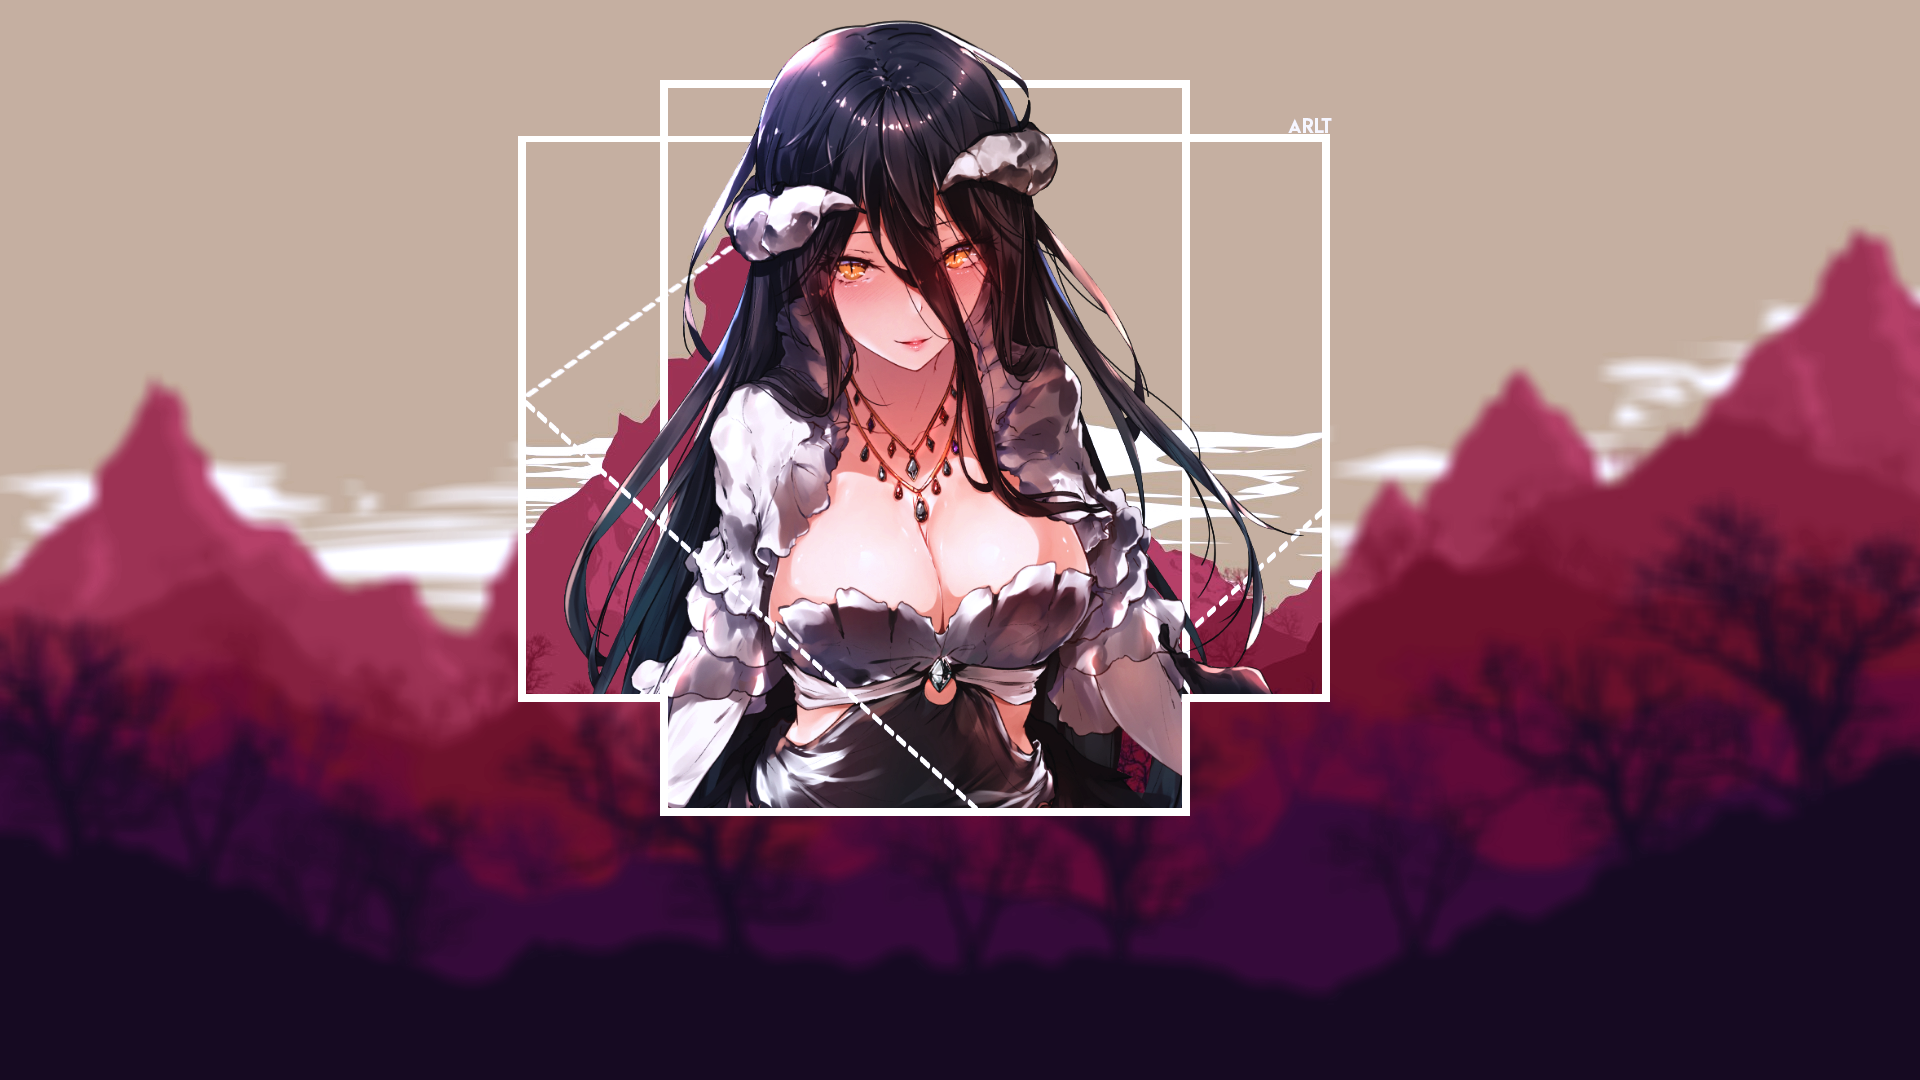 Wallpaper, Overlord anime, Albedo OverLord, anime girls, picture in picture 1920x1080